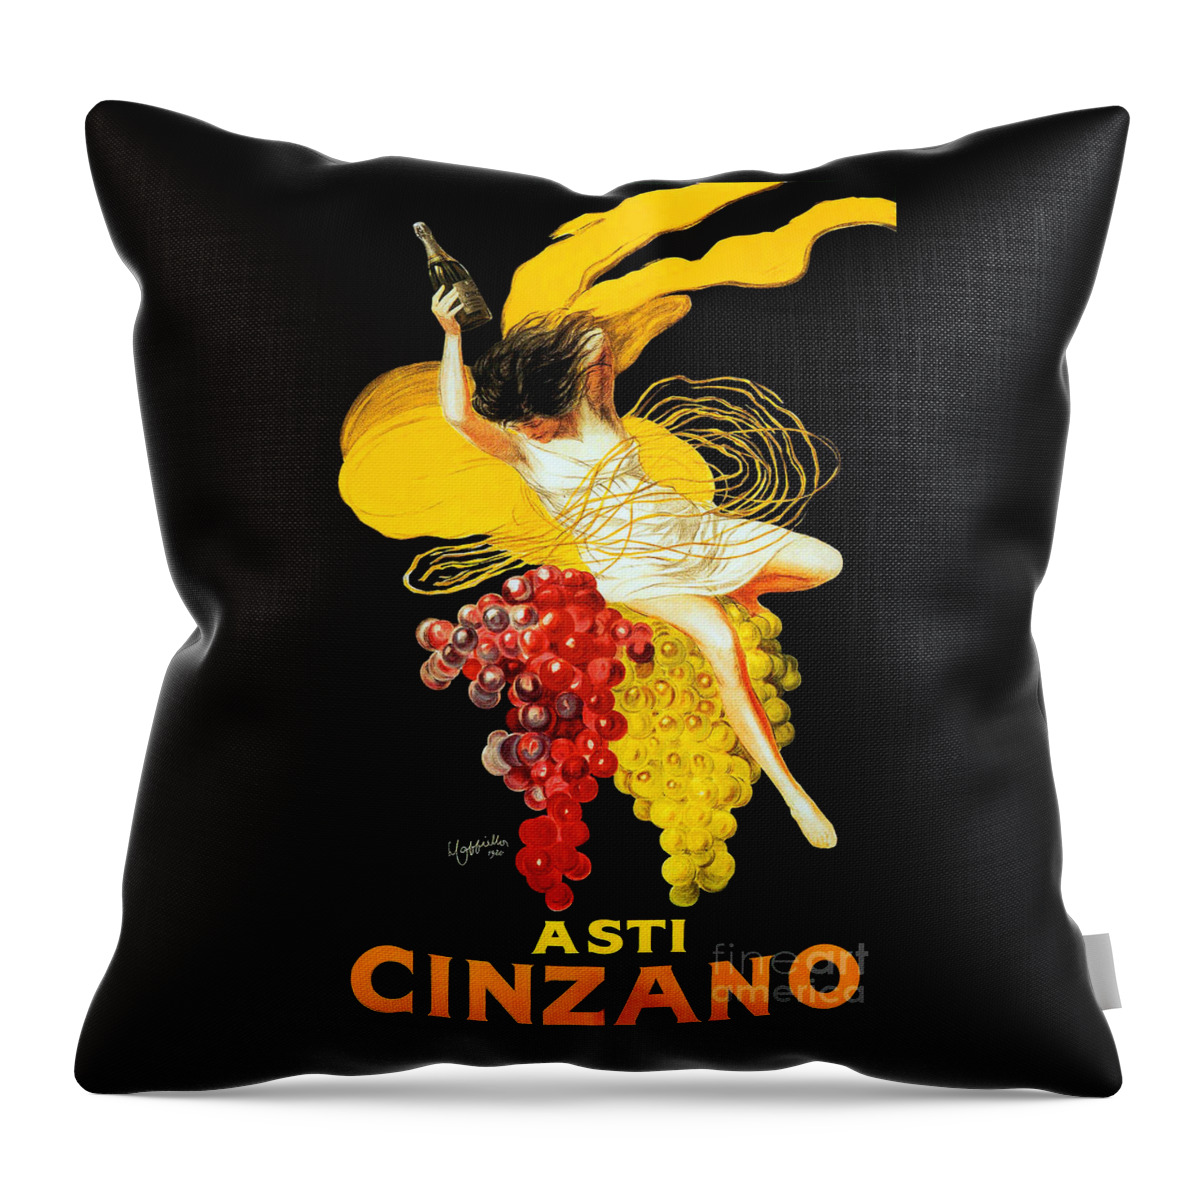 Asti Cinzano Throw Pillow featuring the painting Asti Cinzano Advertising Poster by Leonetto Cappiello